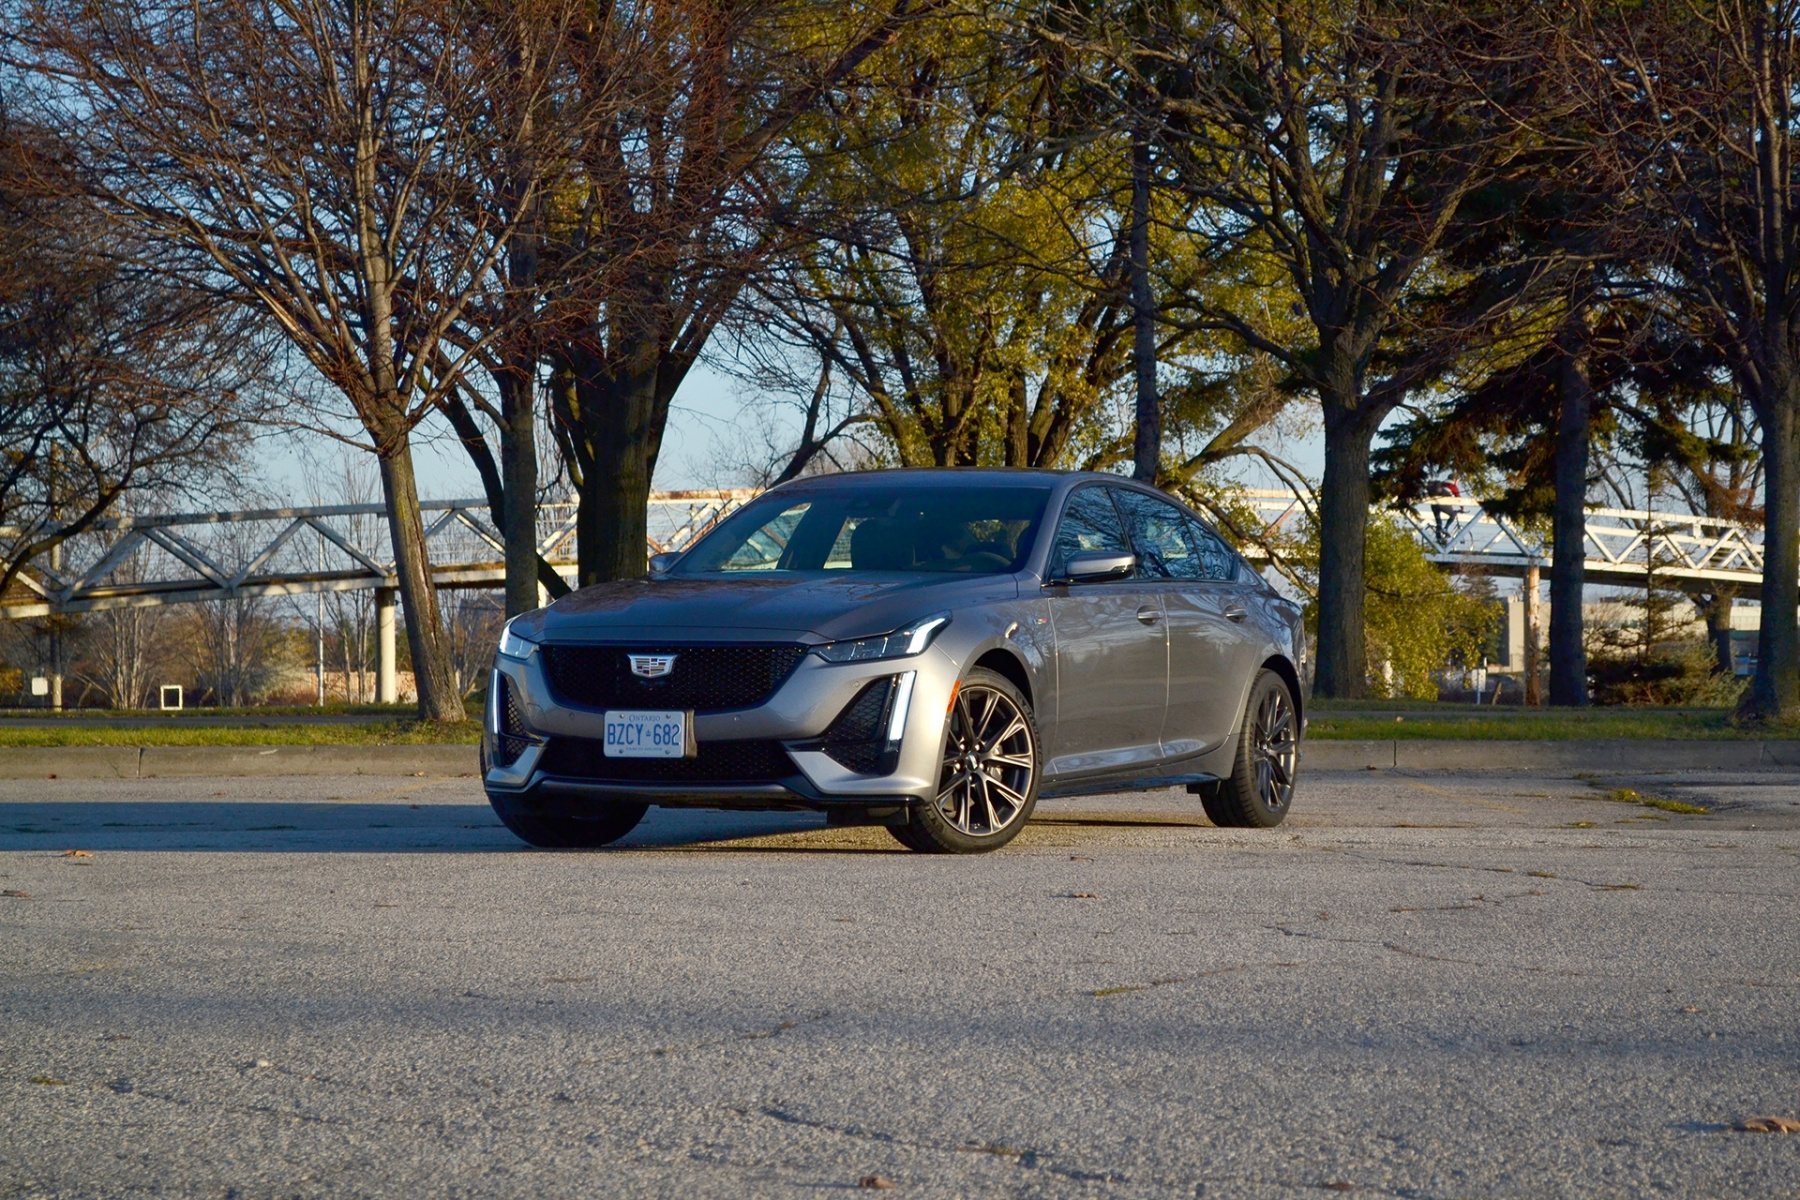 2020 Cadillac CT5-V Review: My Name is My Name - AutoGuide.com